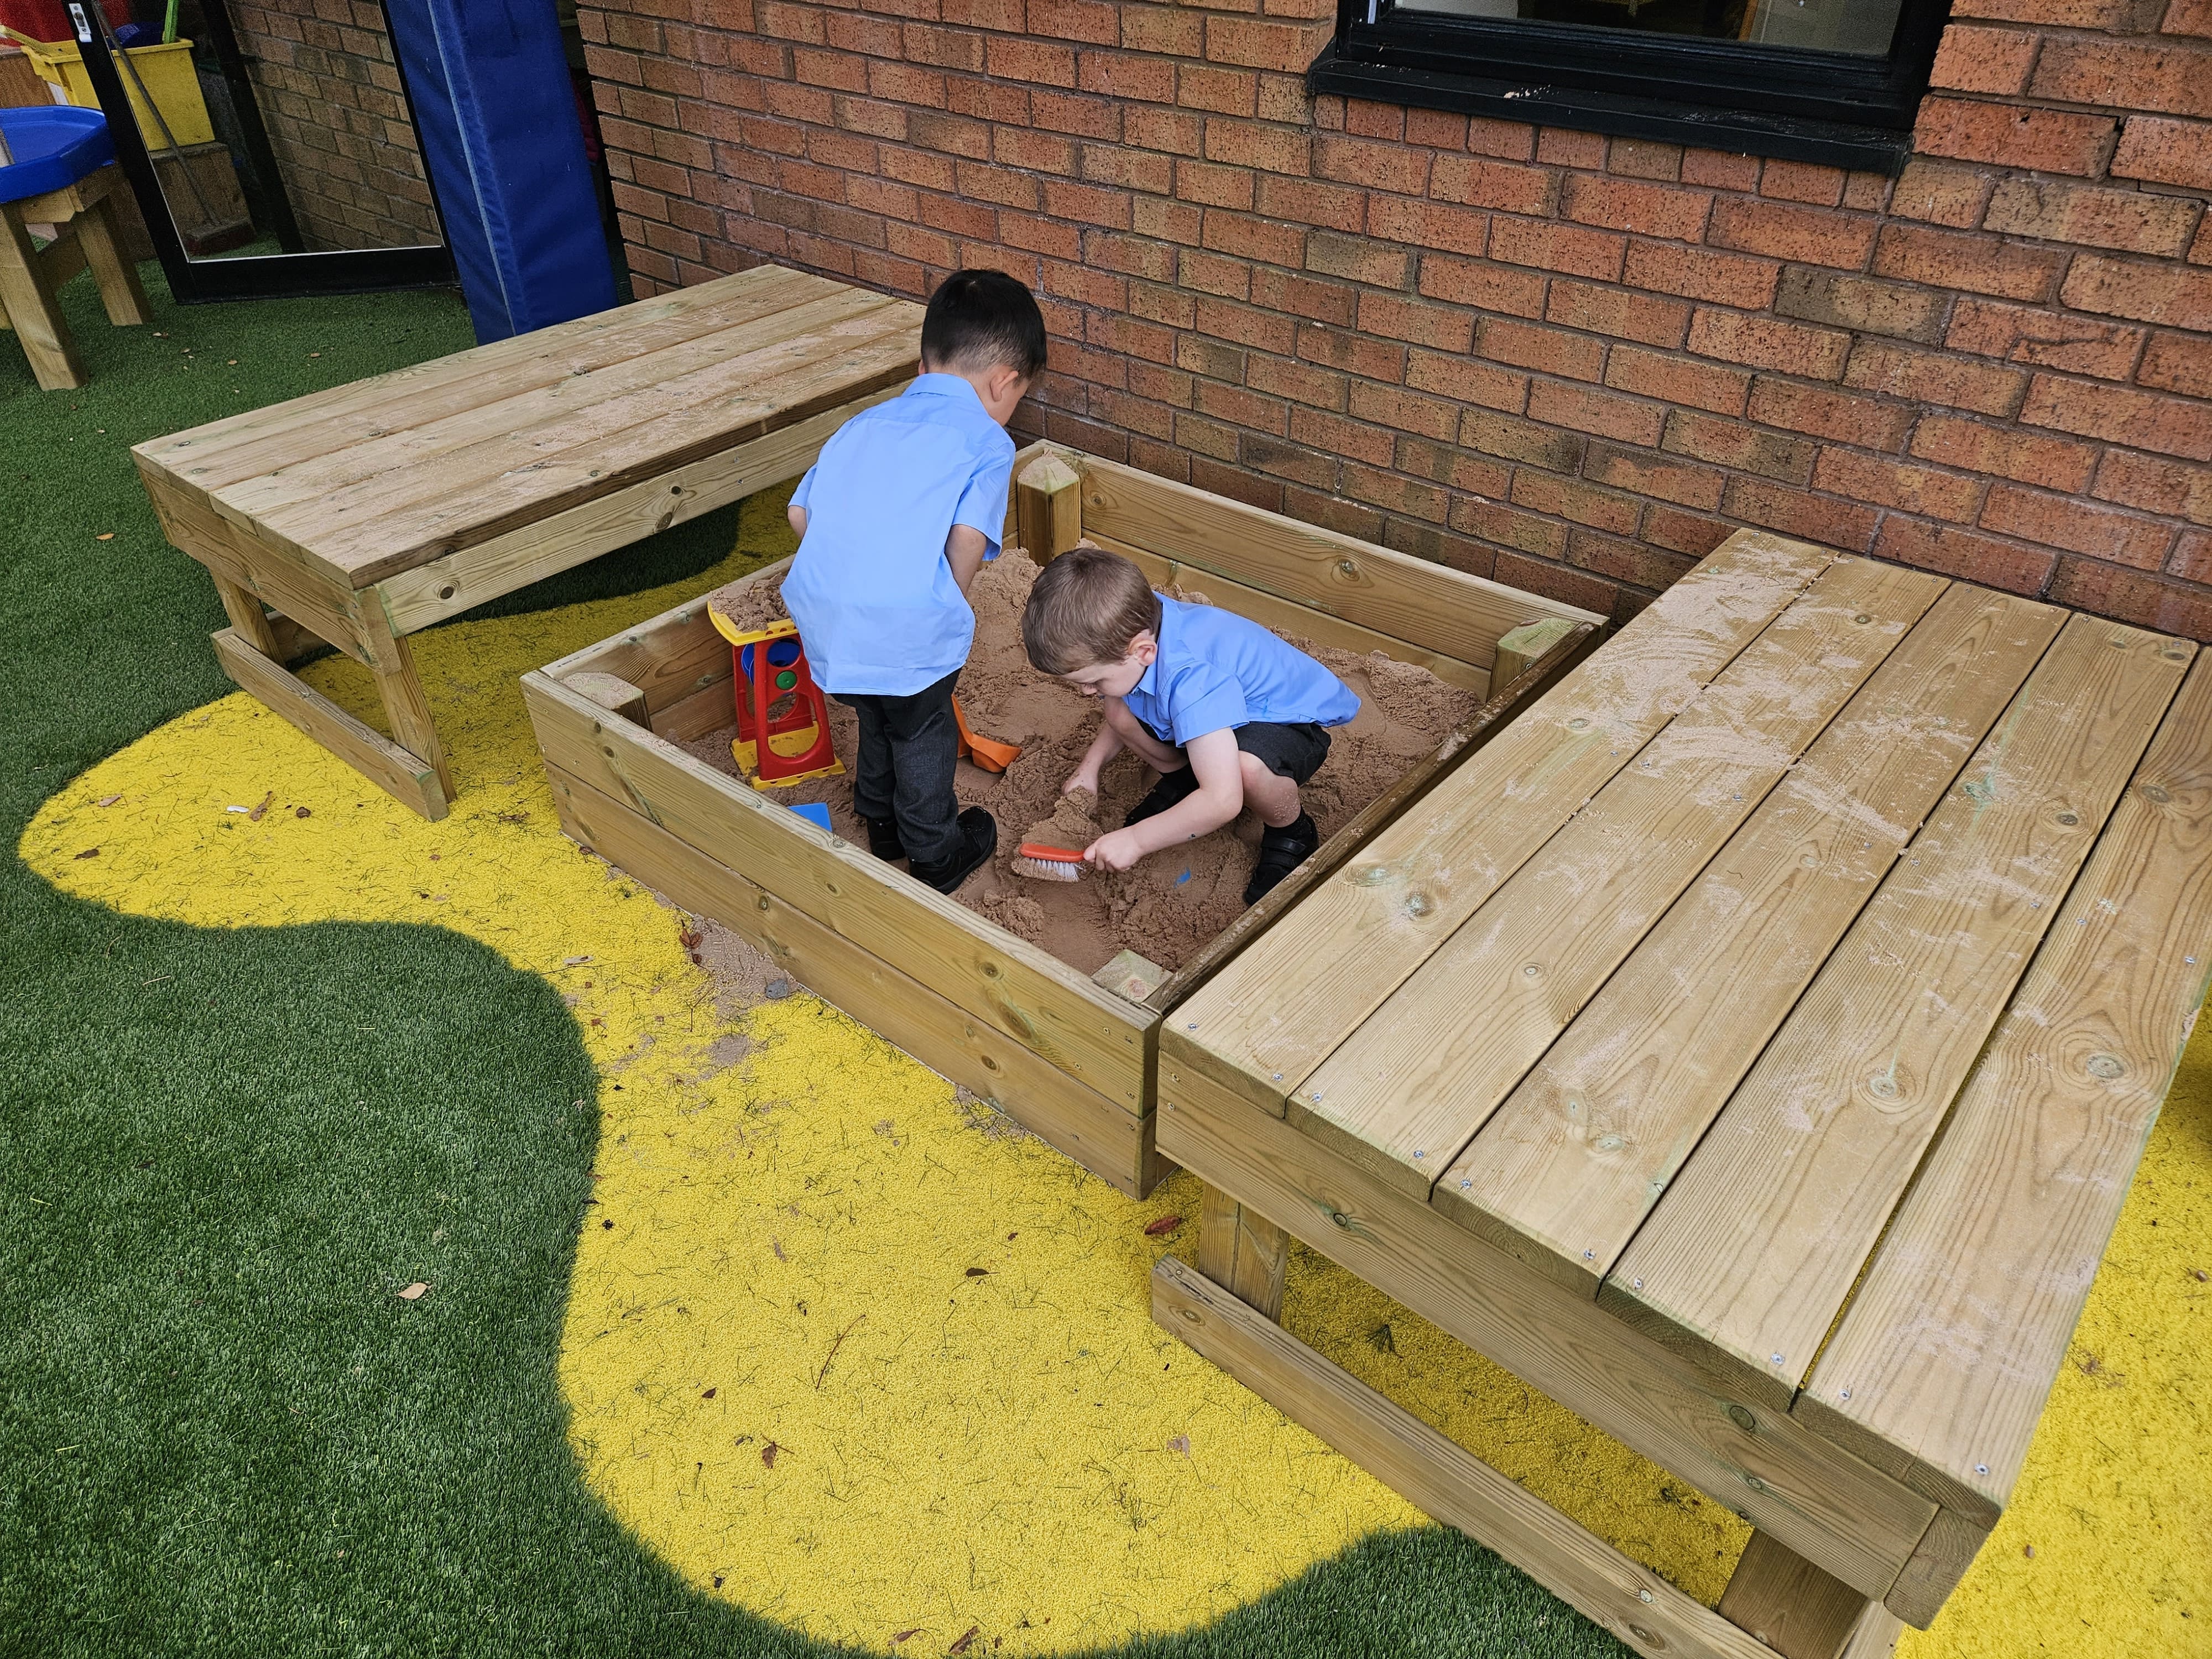 2 children are playing with the Pentagon sandbox. The kids are using some different tools, like a brush and shovel, to move the sand around. Outside the box, the artificial grass can be seen, creating a colourful environment,